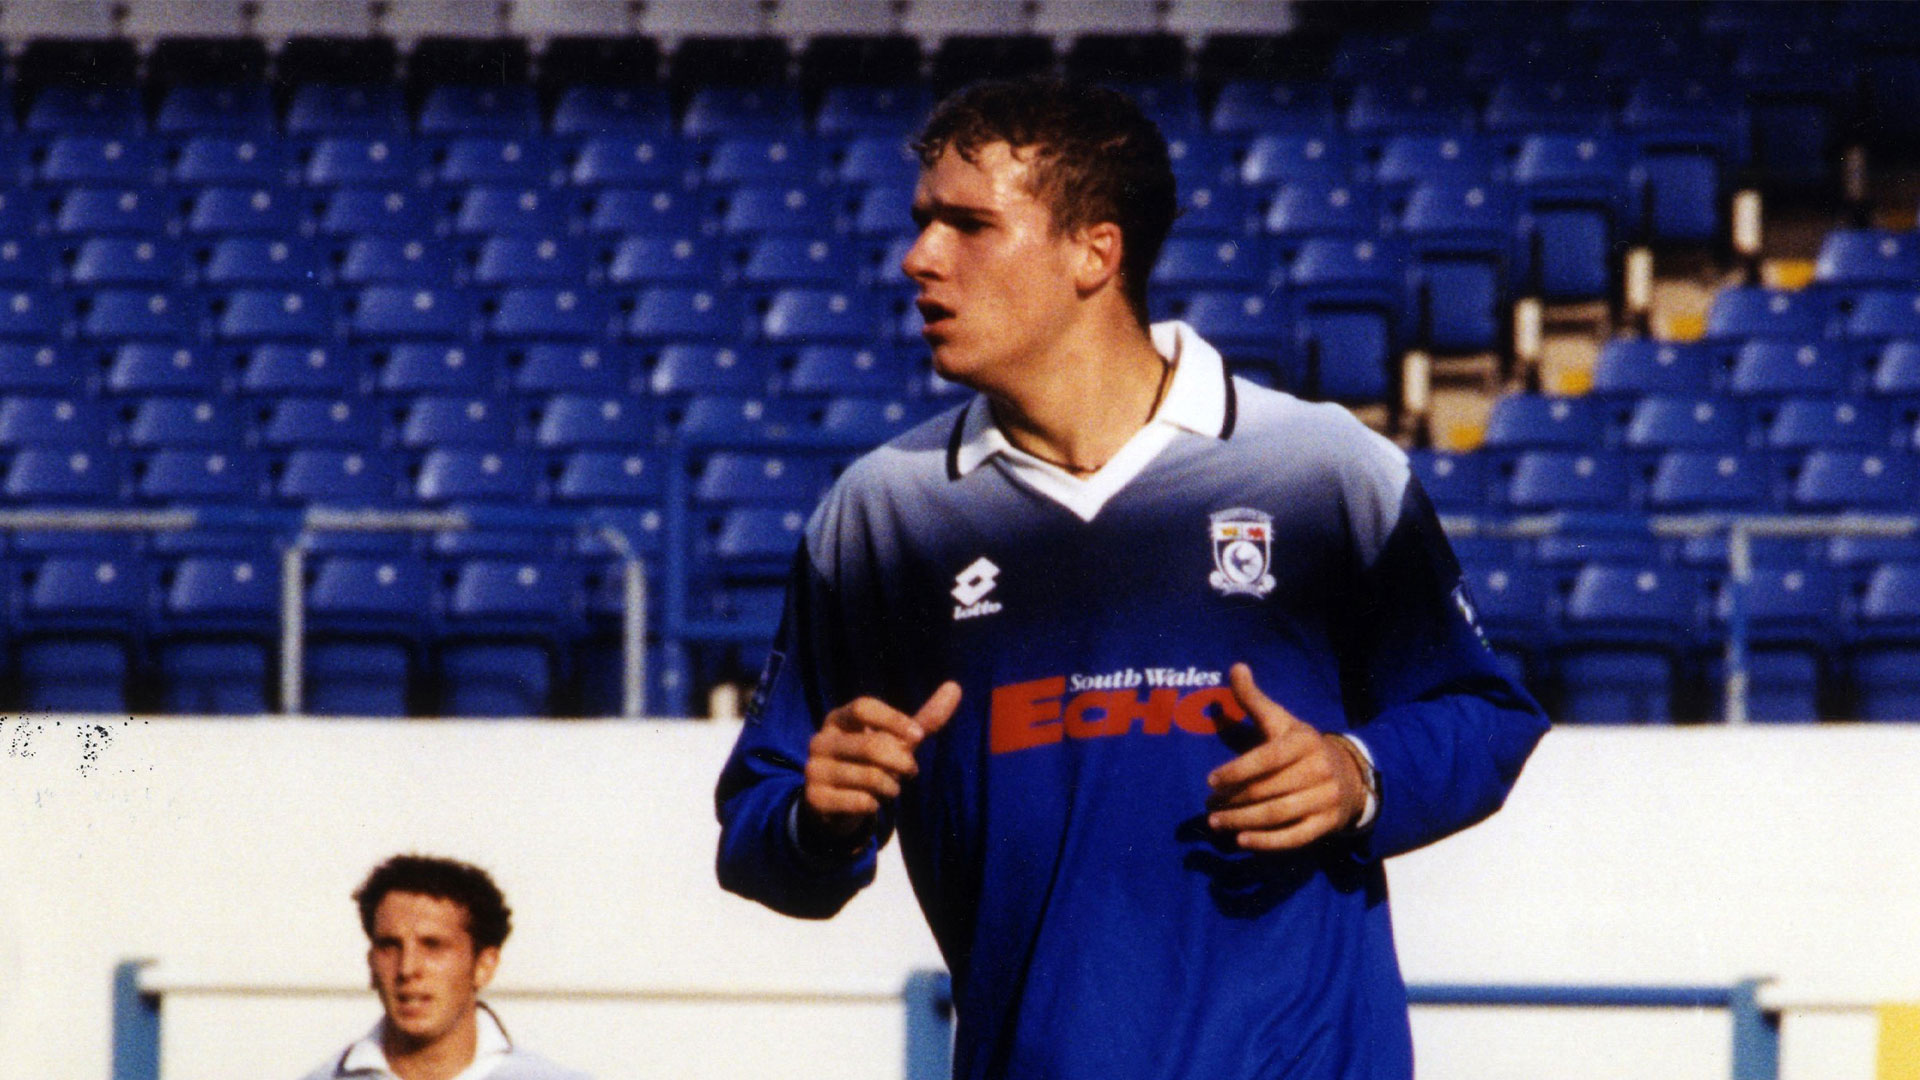 Simon Haworth in action for Cardiff City